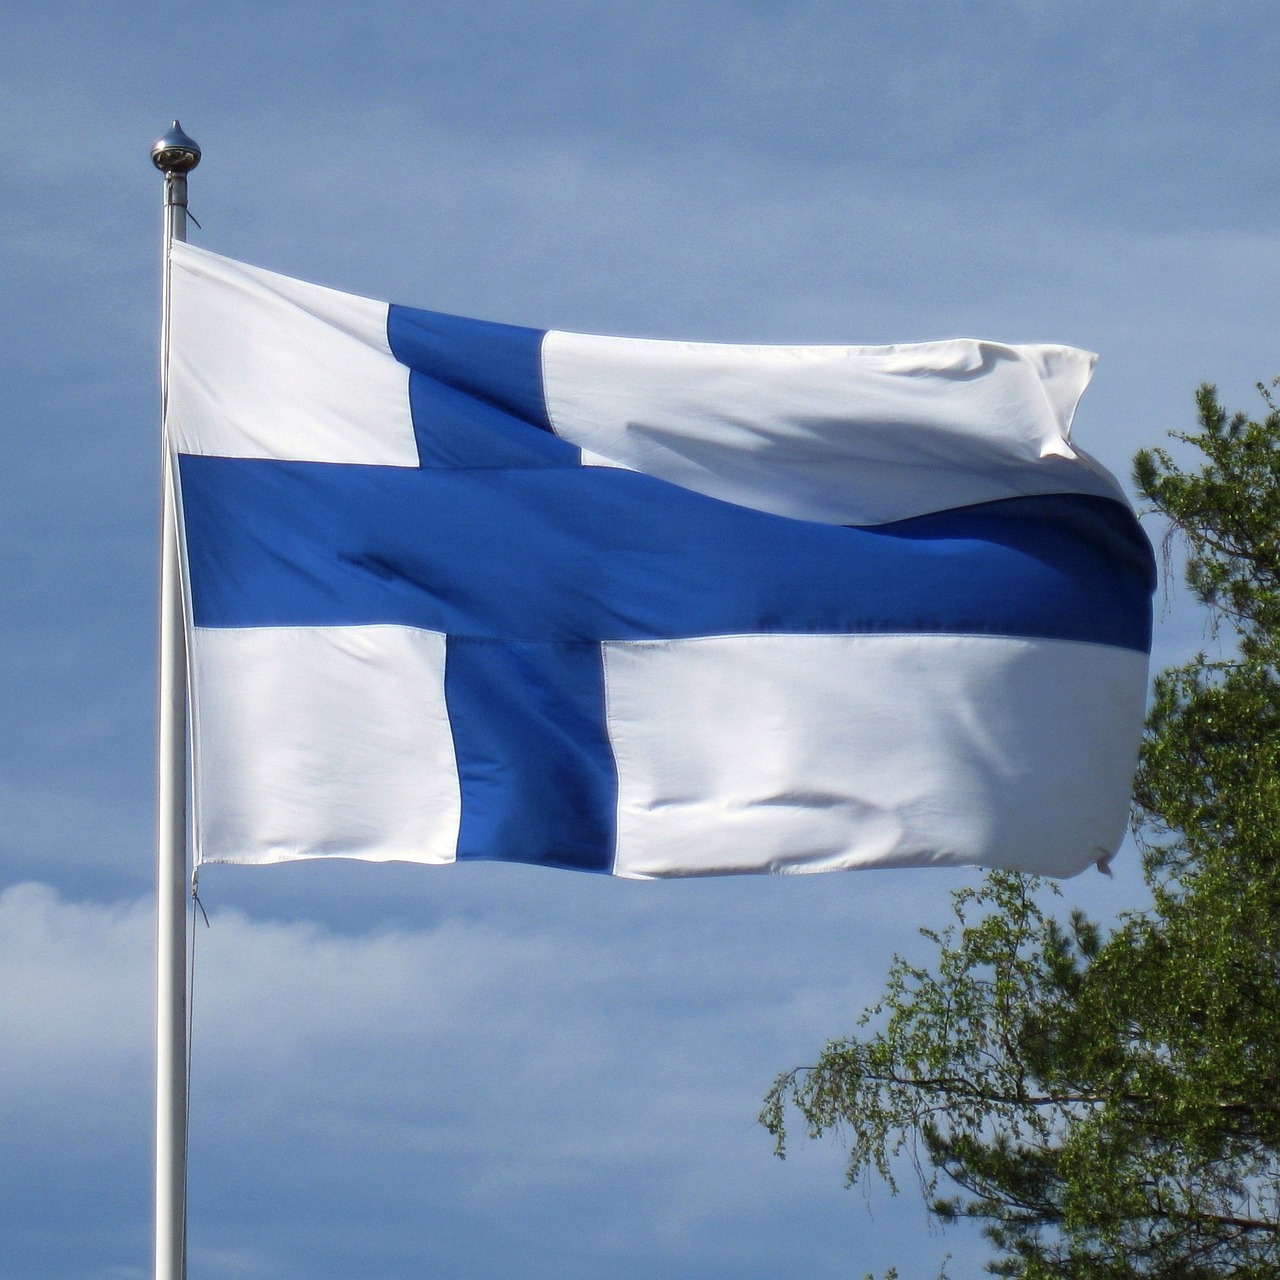 Is it easy or hard to move to Finland as a foreigner?